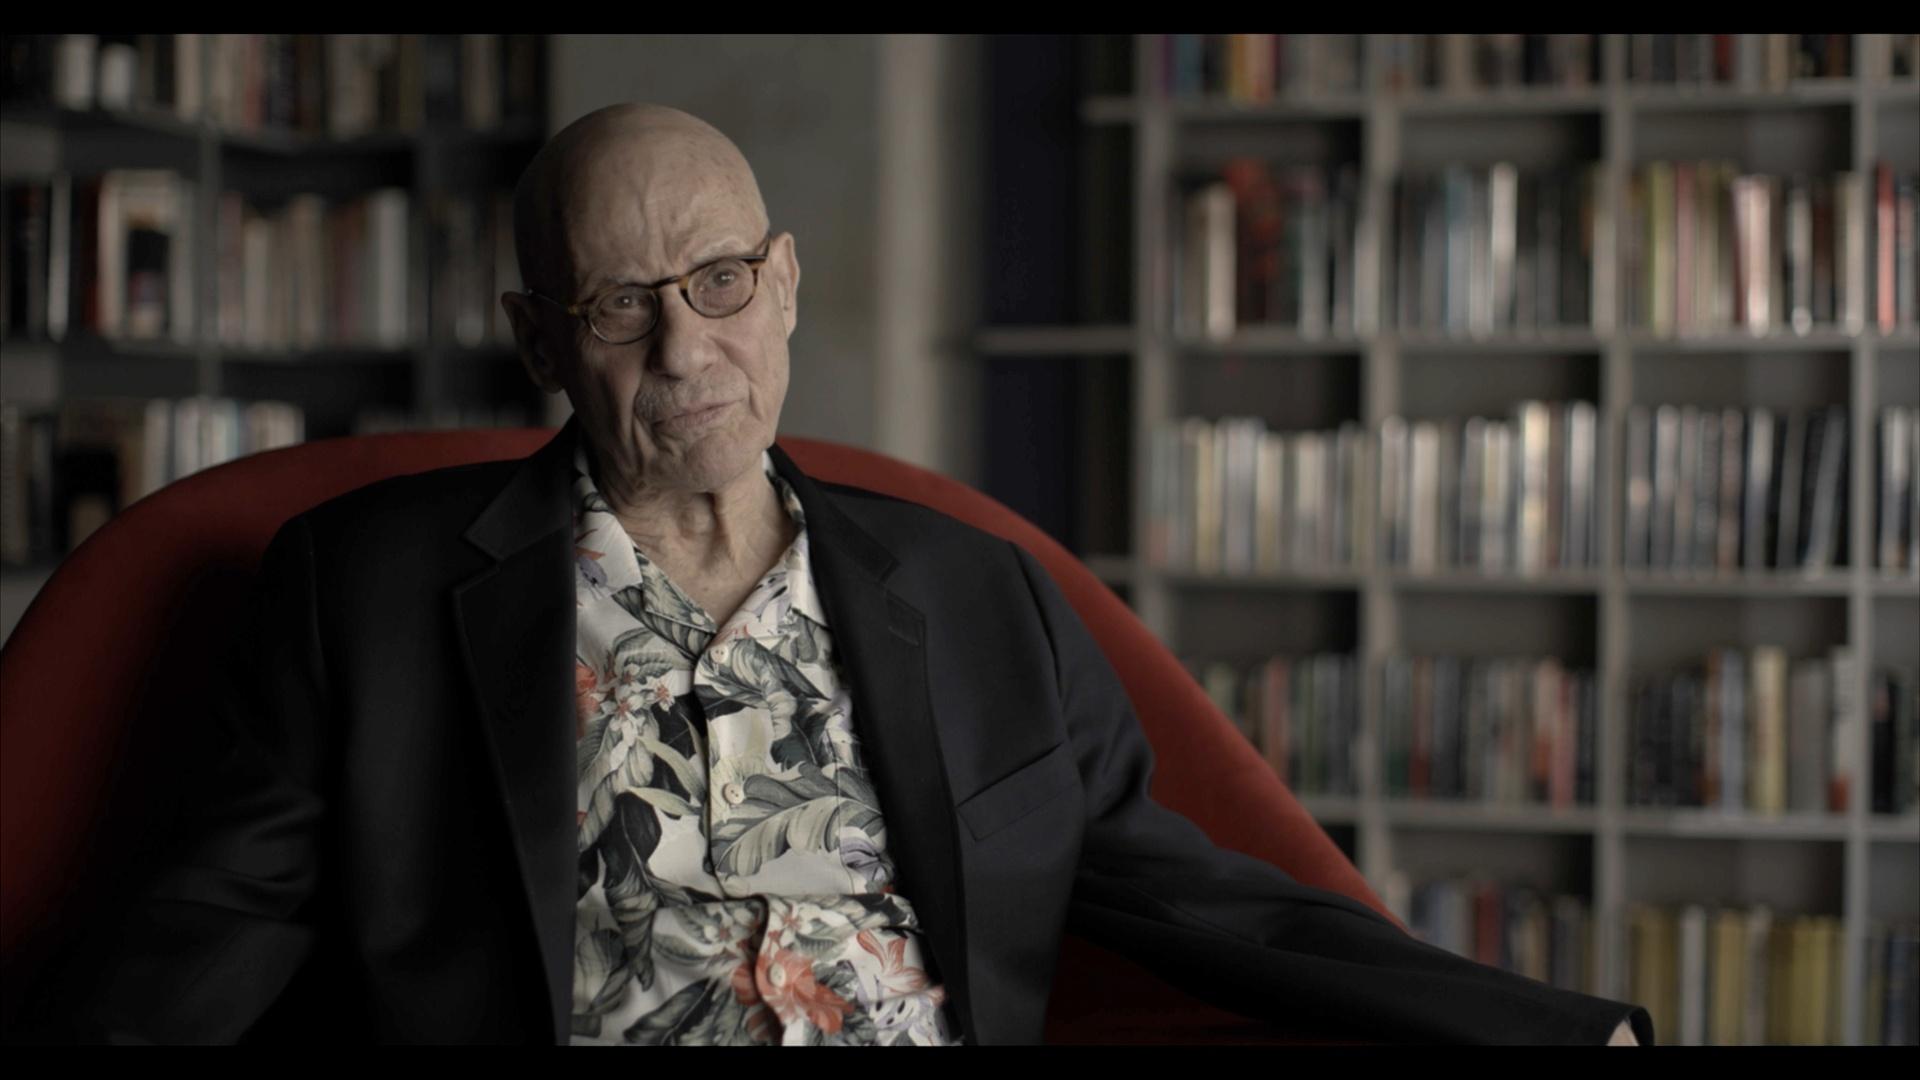 James Ellroy is an author of such books as The Black Dahlia and L.A. Confidential.